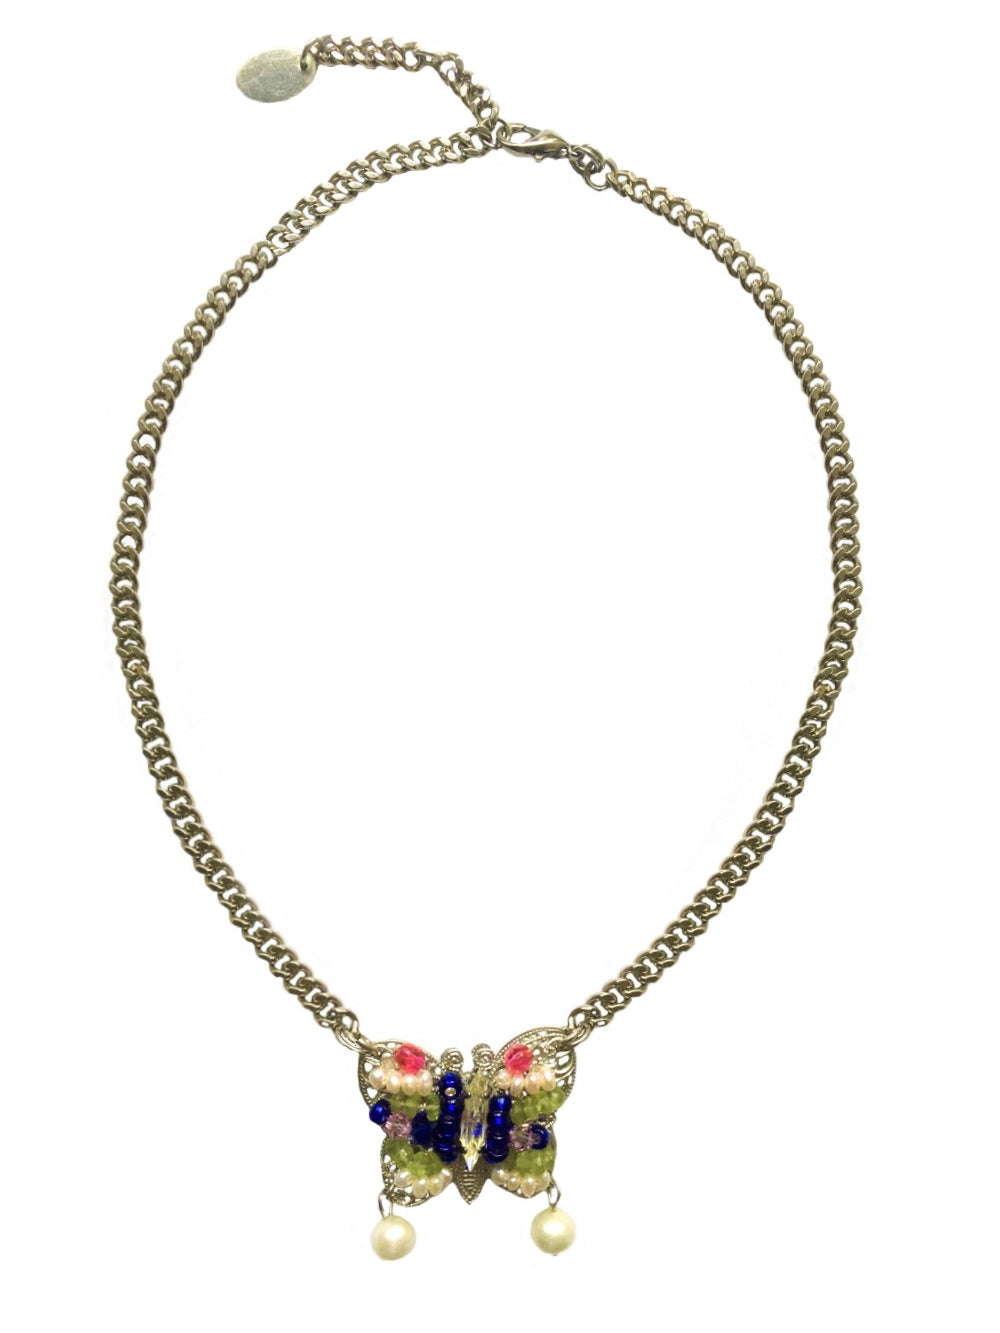 Butterfly Multicolored Necklace  - Small